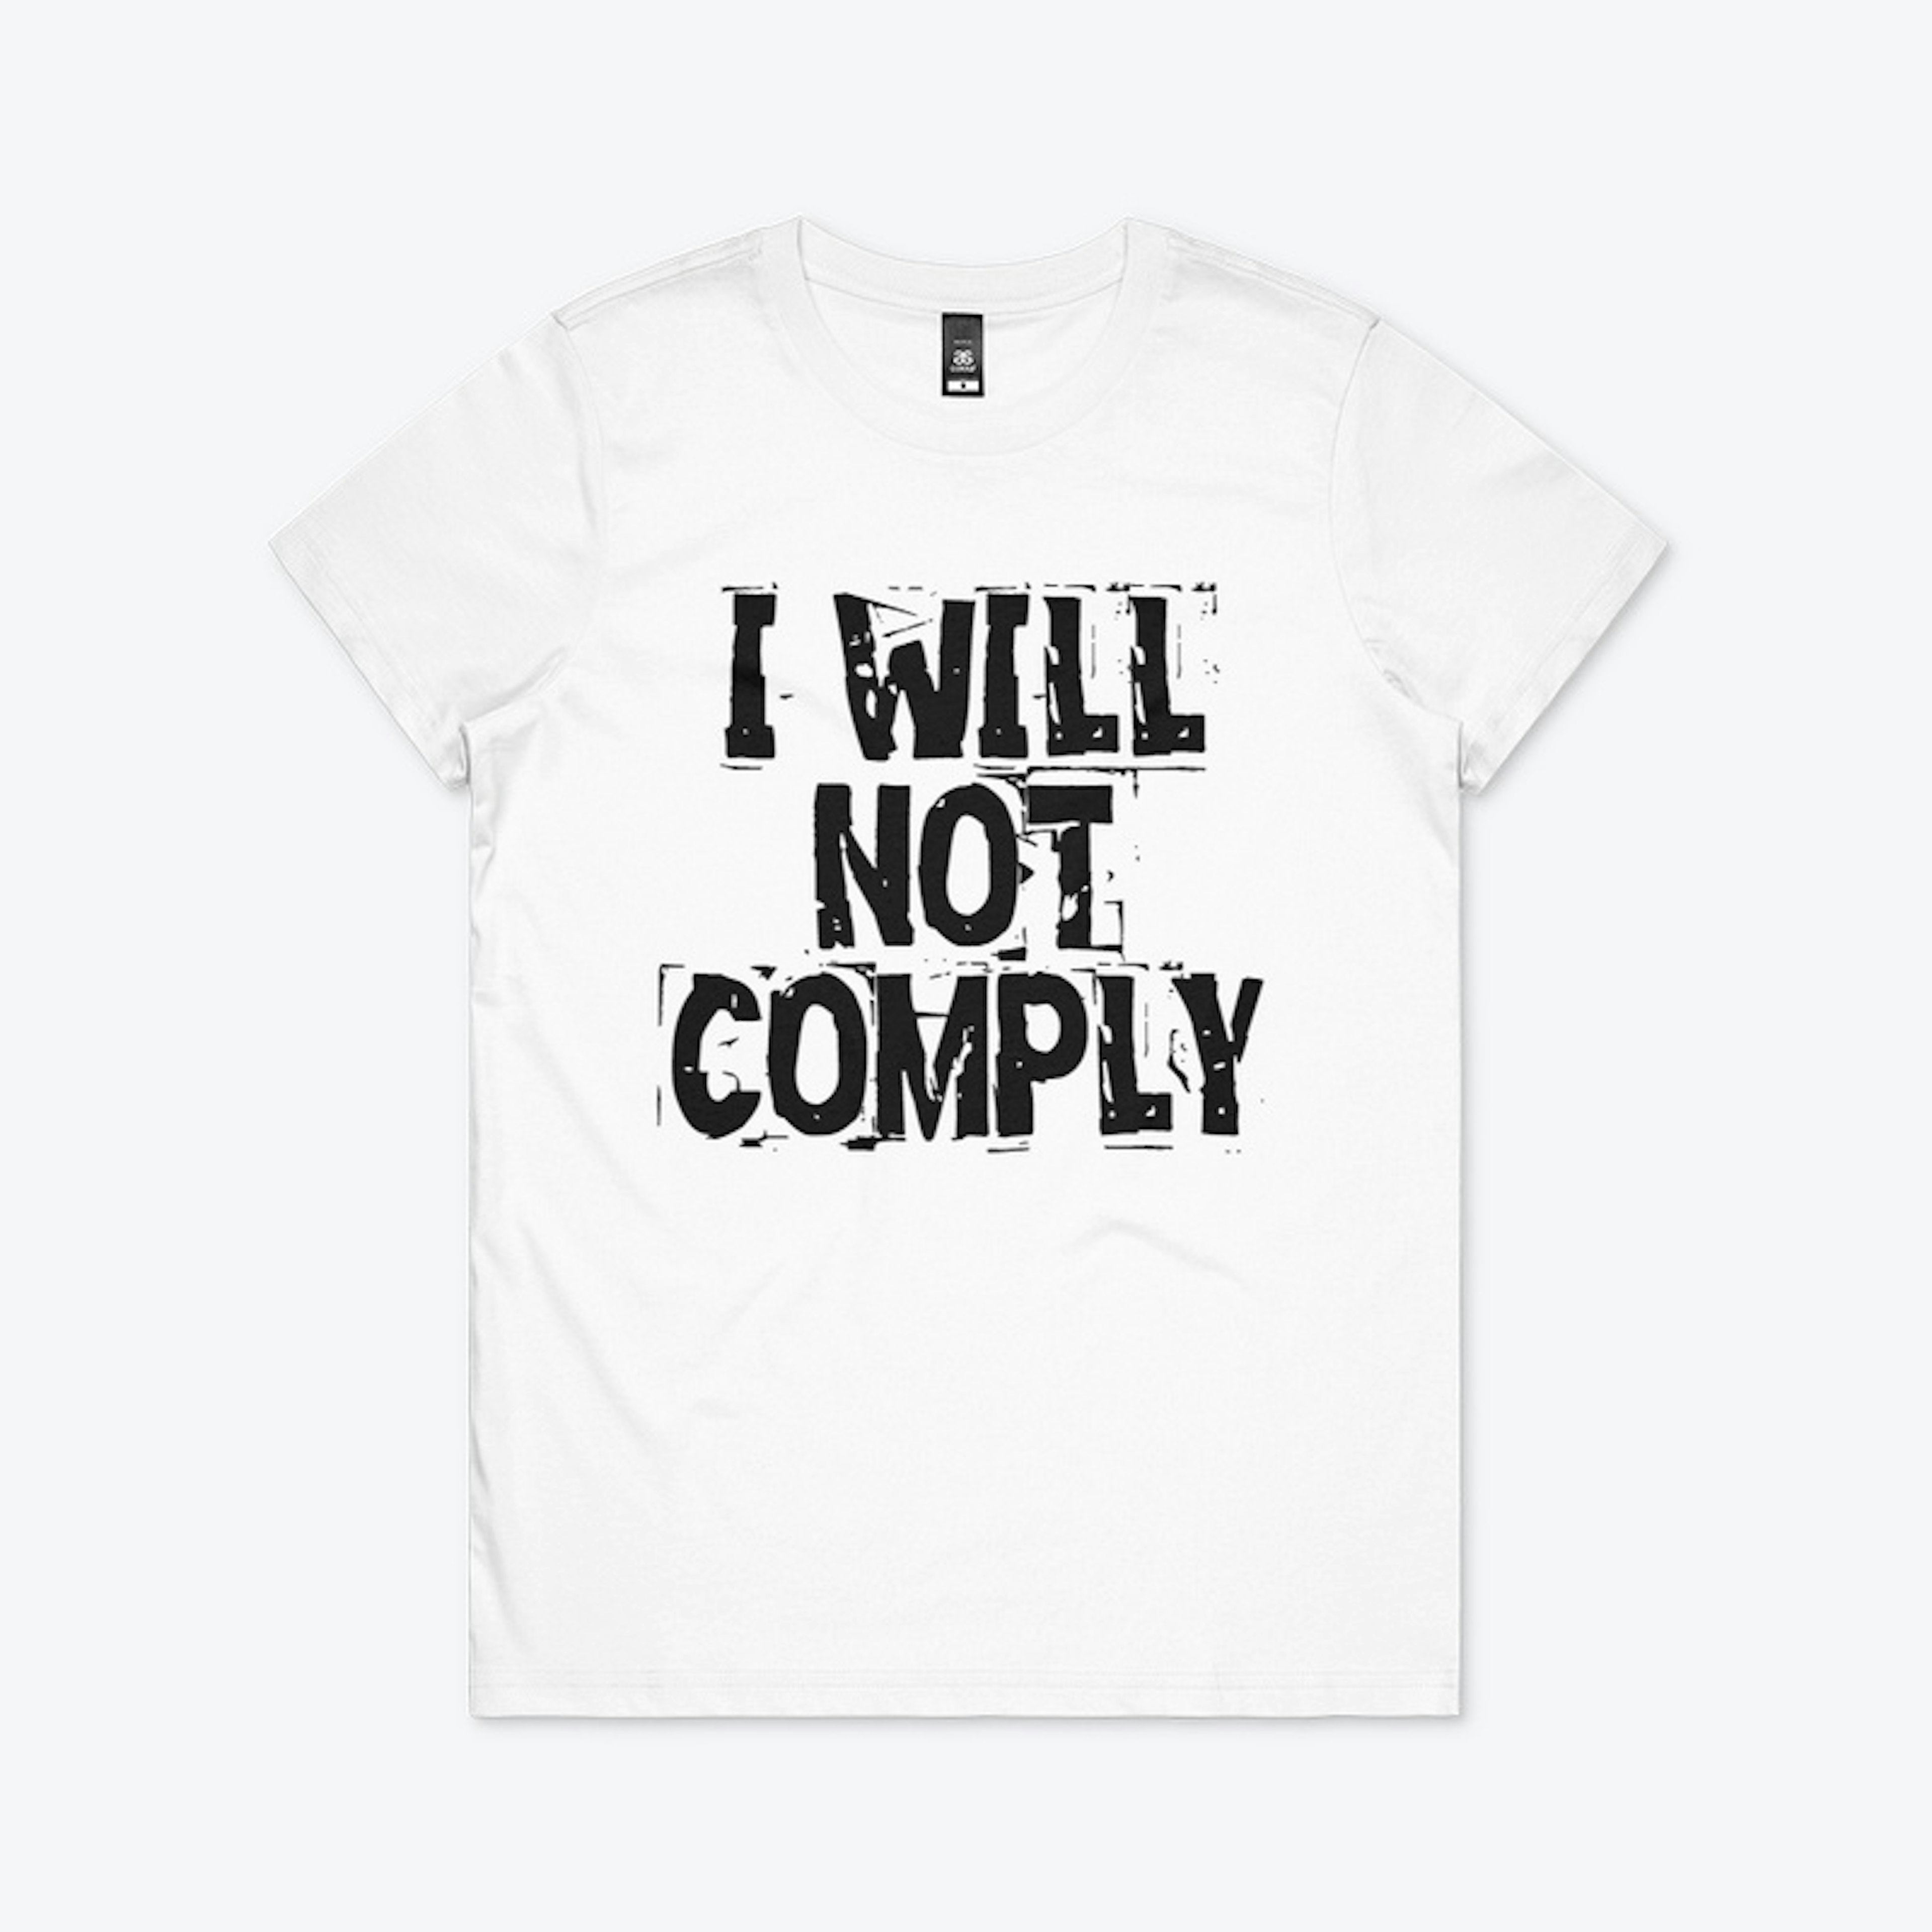 I WILL NOT COMPLY